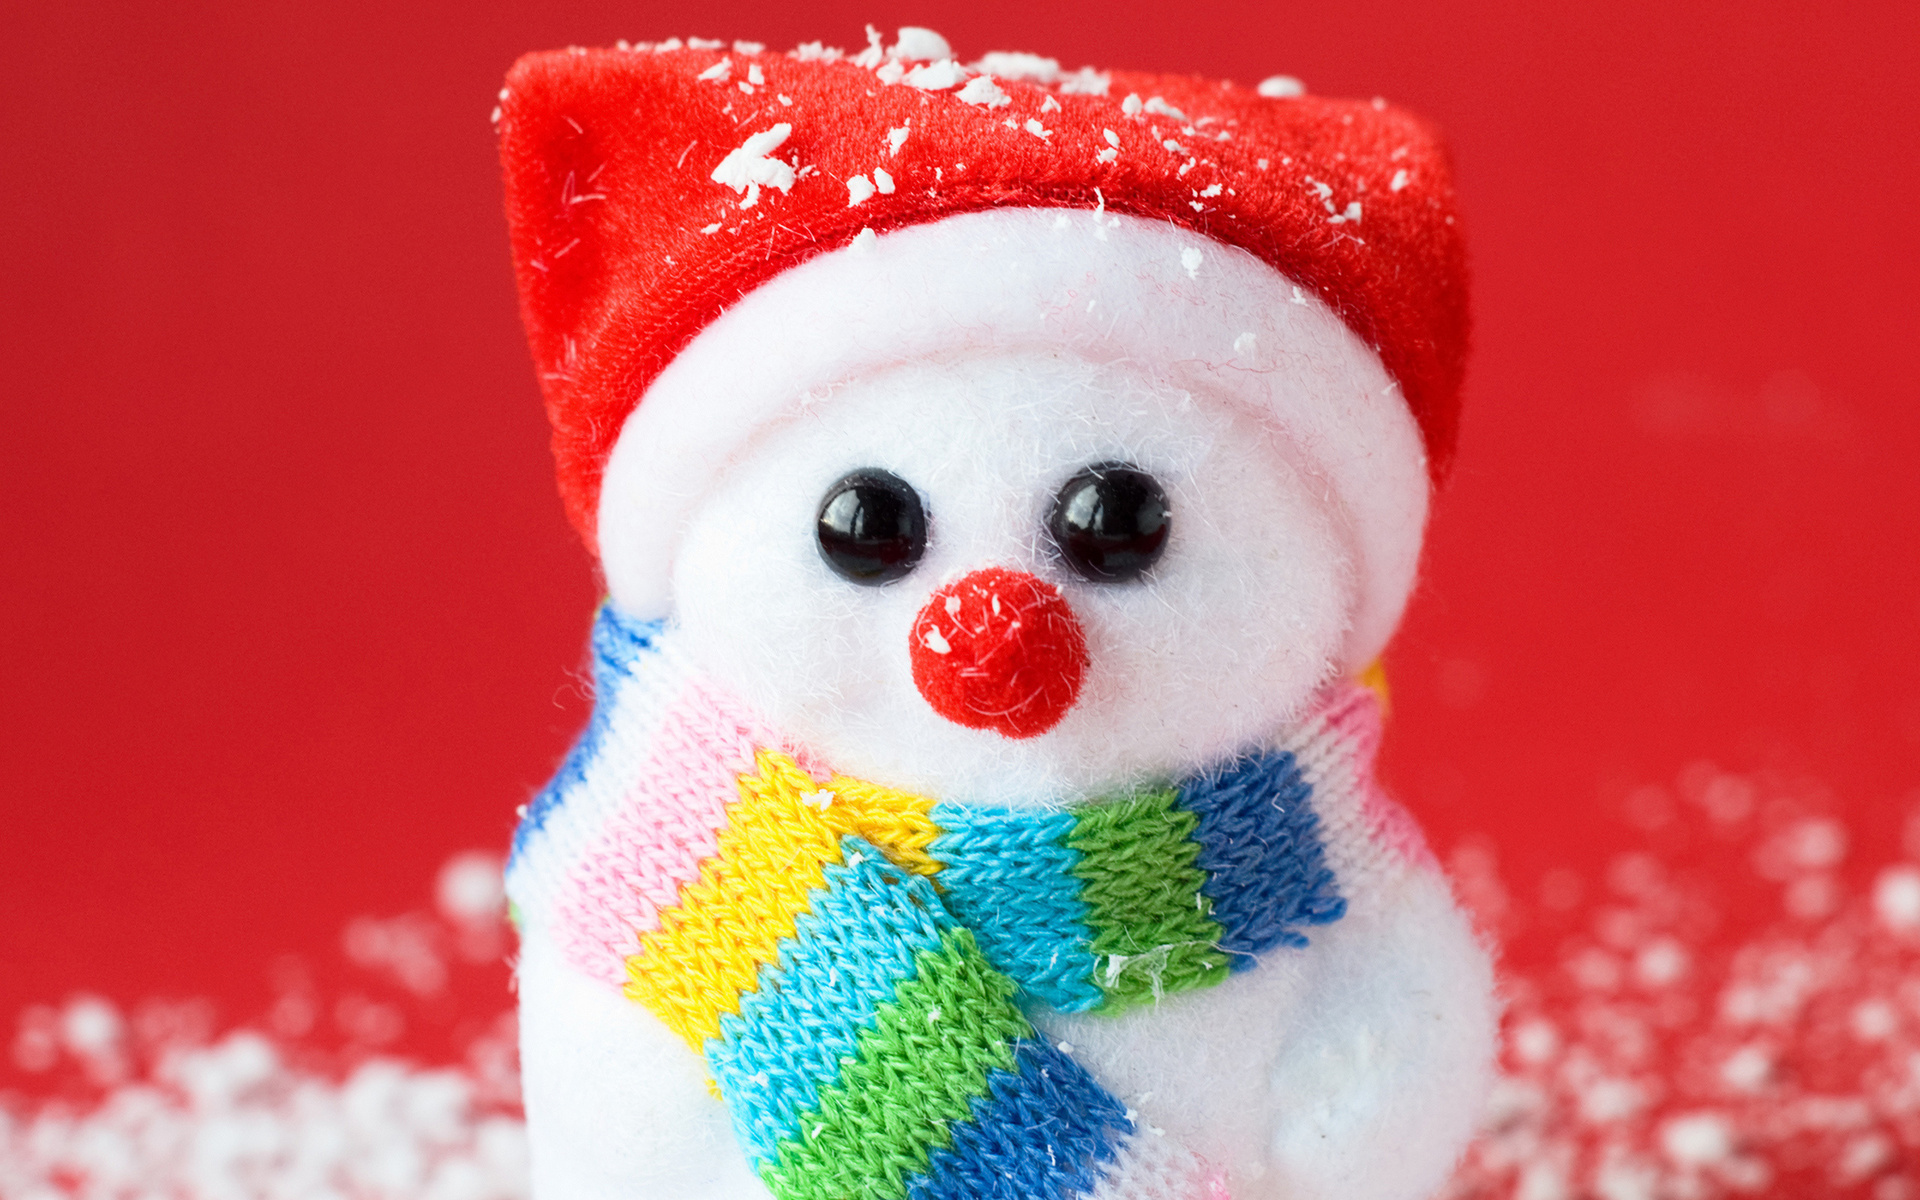 Snowman 4K wallpapers for your desktop or mobile screen free and easy to download